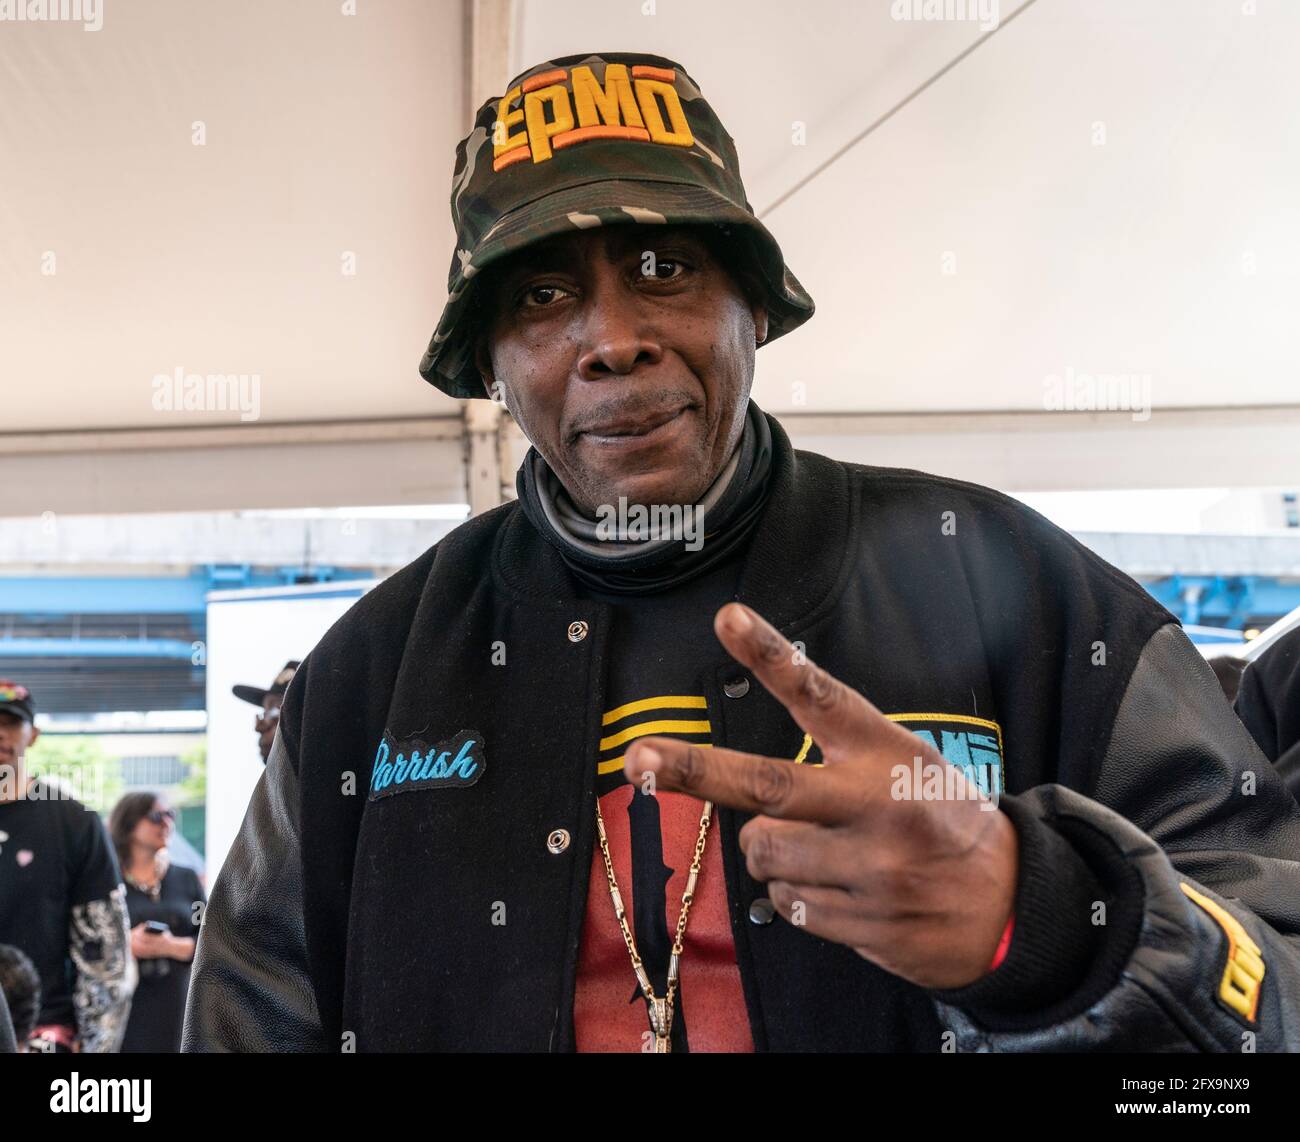 New York, NY - May 20, 2021: Hip Hop artist PMD, aka Parrish Smith, of the rap group EPMD attends The Universal Hip Hop Museum groundbreaking ceremony at Bronx Point Stock Photo